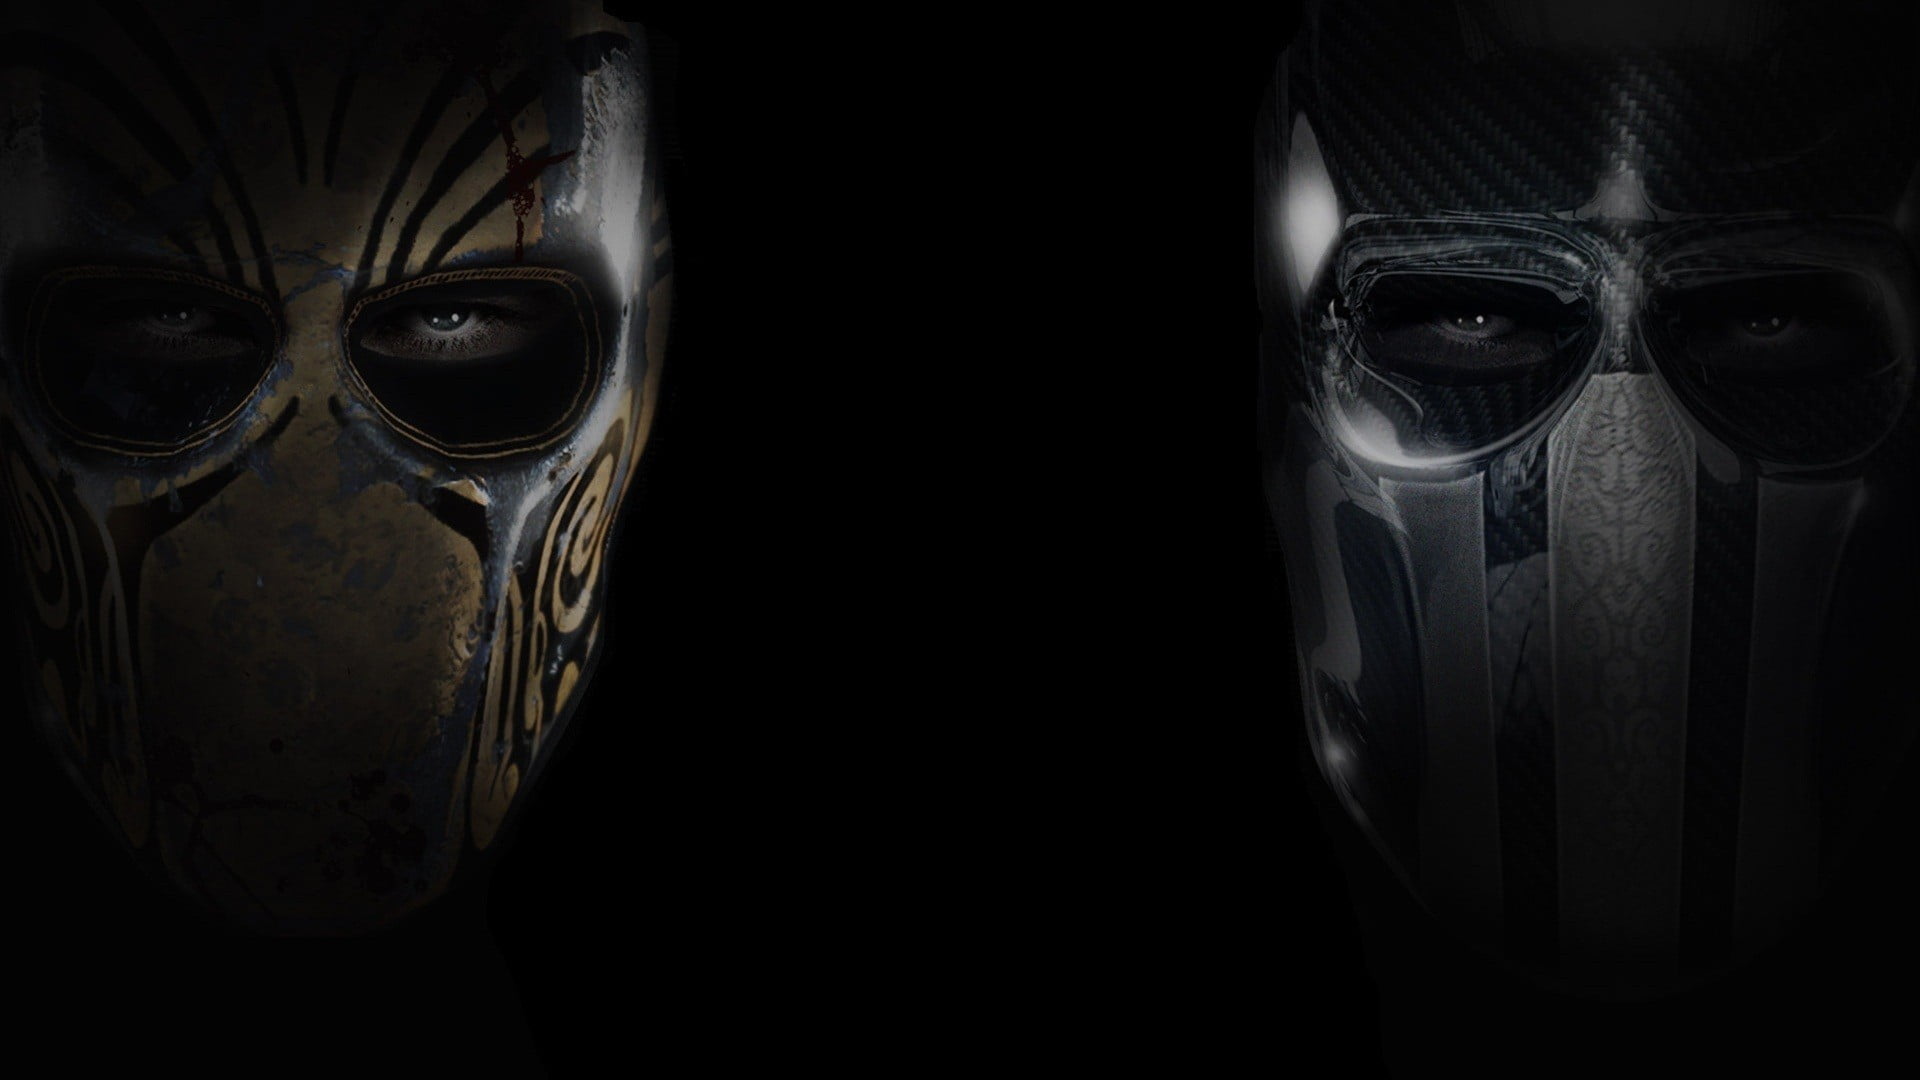 Black Panther-themed masks, Army of Two, disguise, mask - disguise